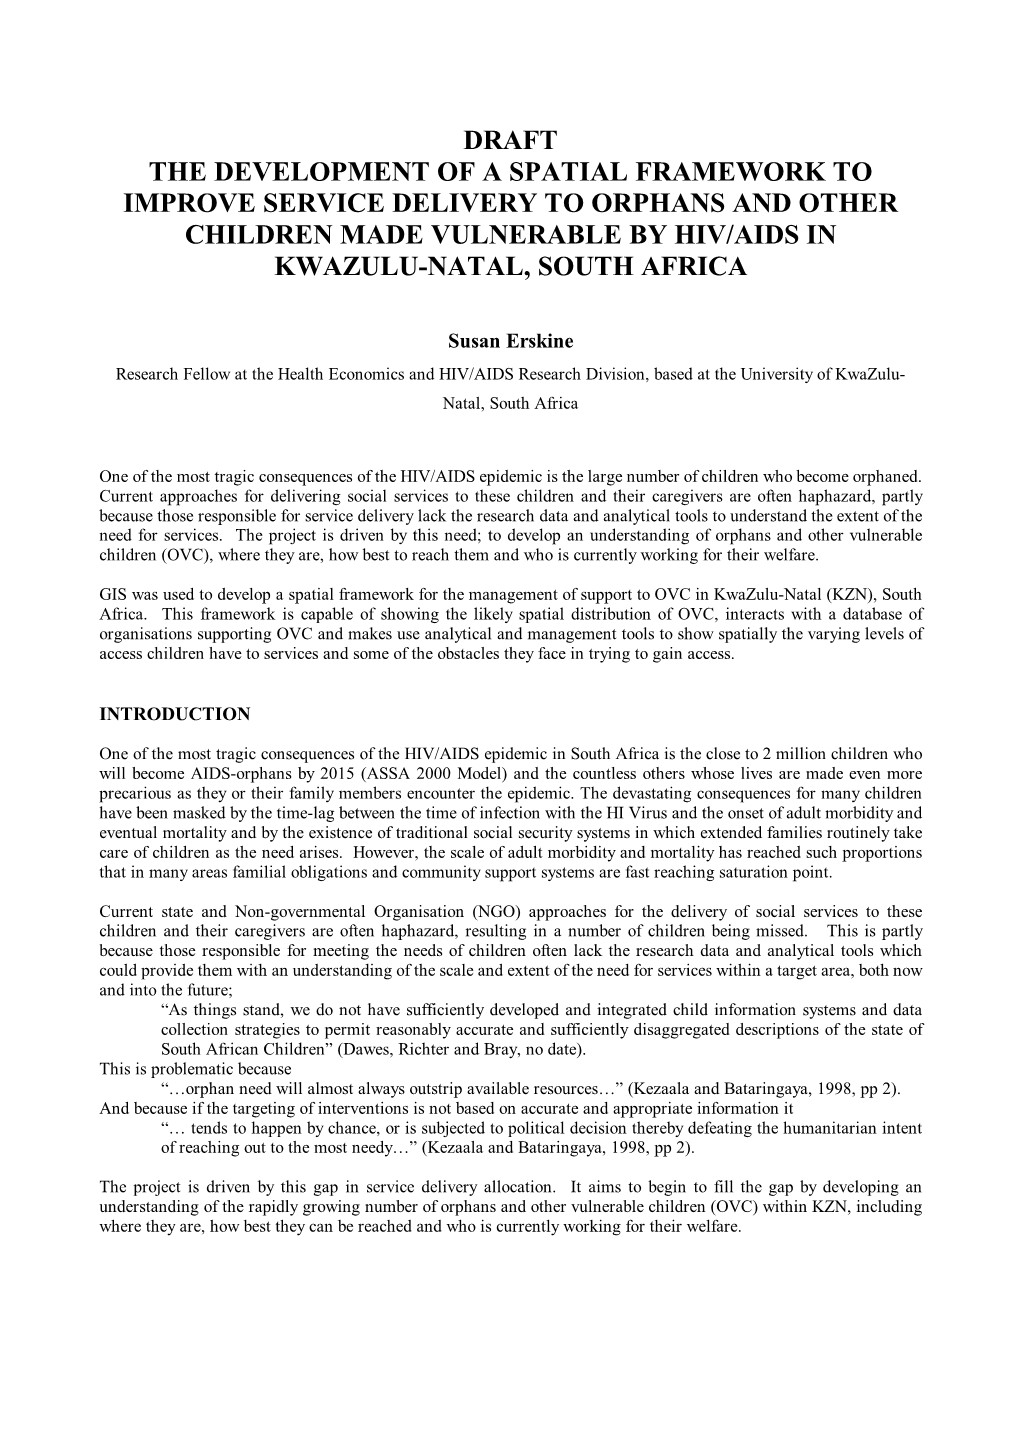 Draft the Development of a Spatial Framework to Improve Service Delivery to Orphans and Other Children Made Vulnerable by Hiv/Aids in Kwazulu-Natal, South Africa